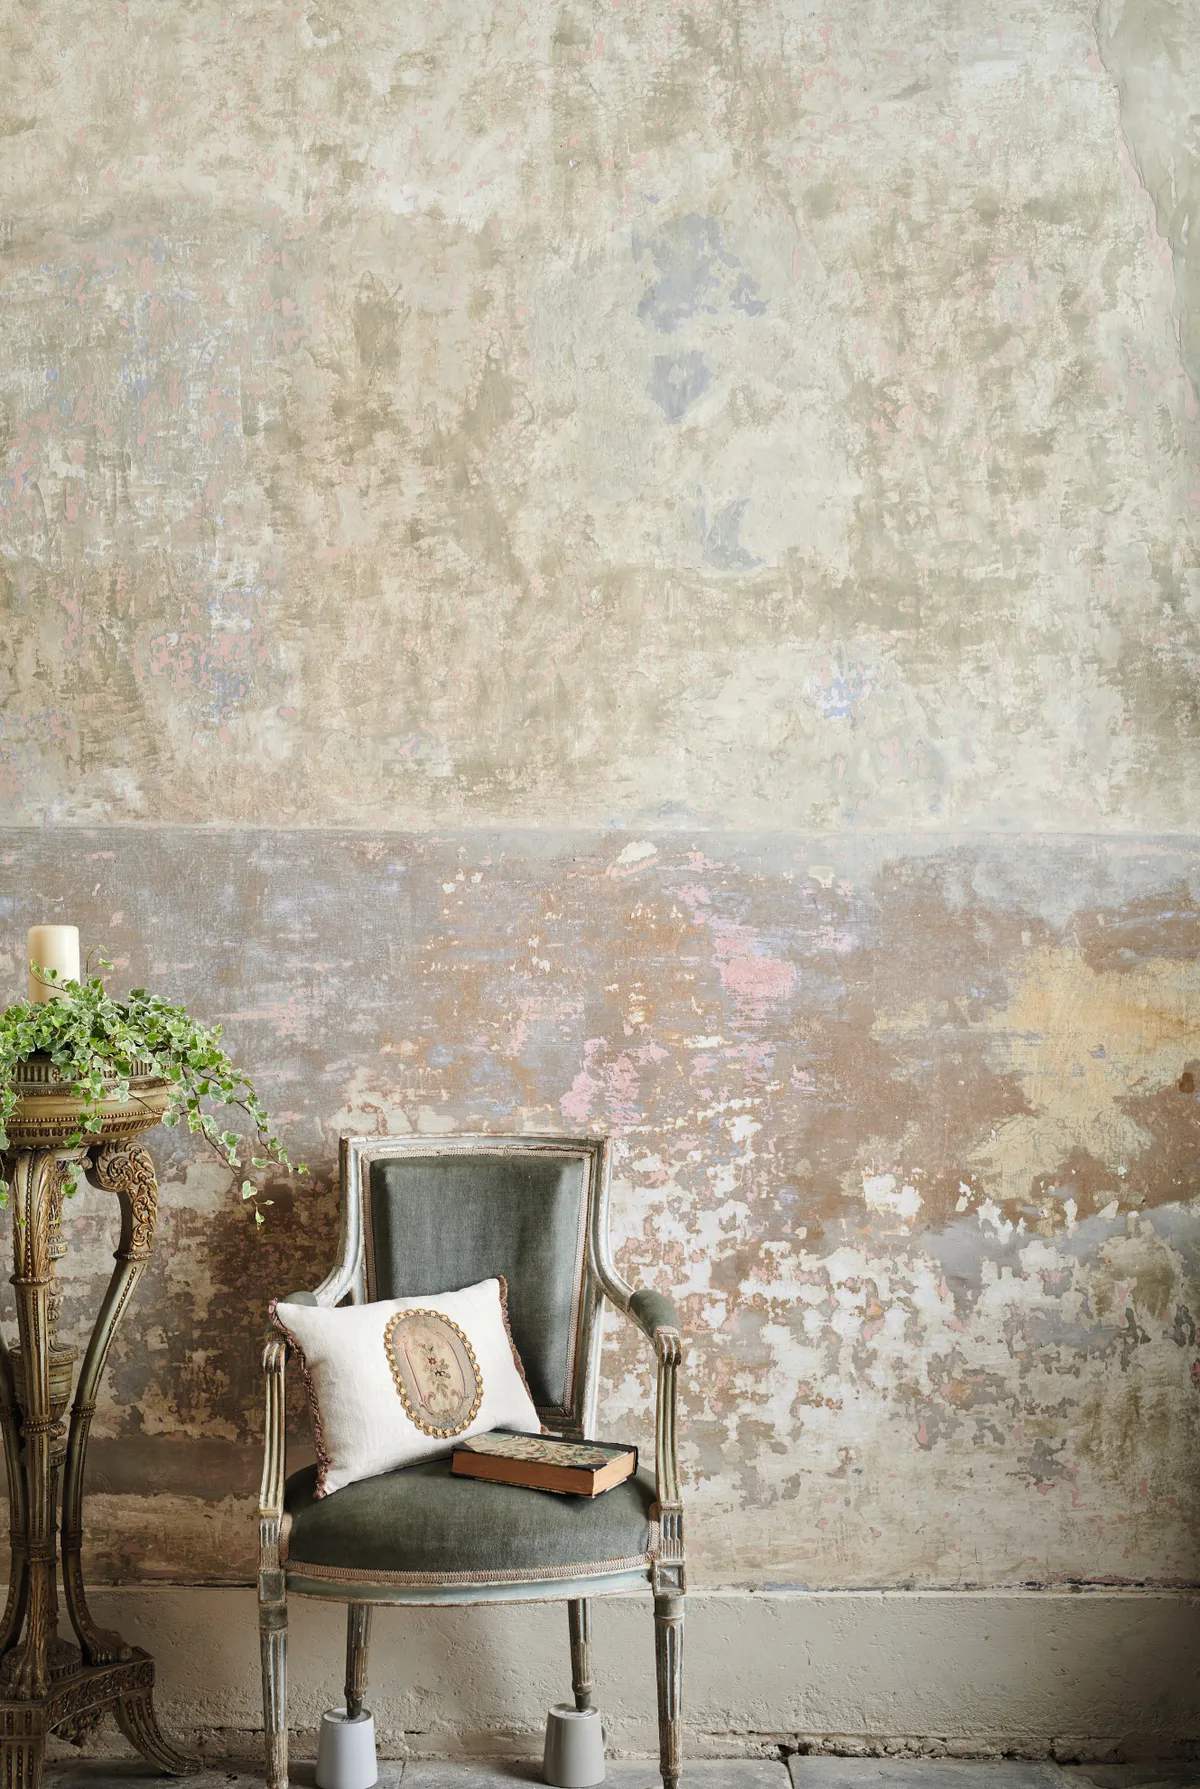 An antique Louis XVI chair in front of a stripped, bare-plaster wall.